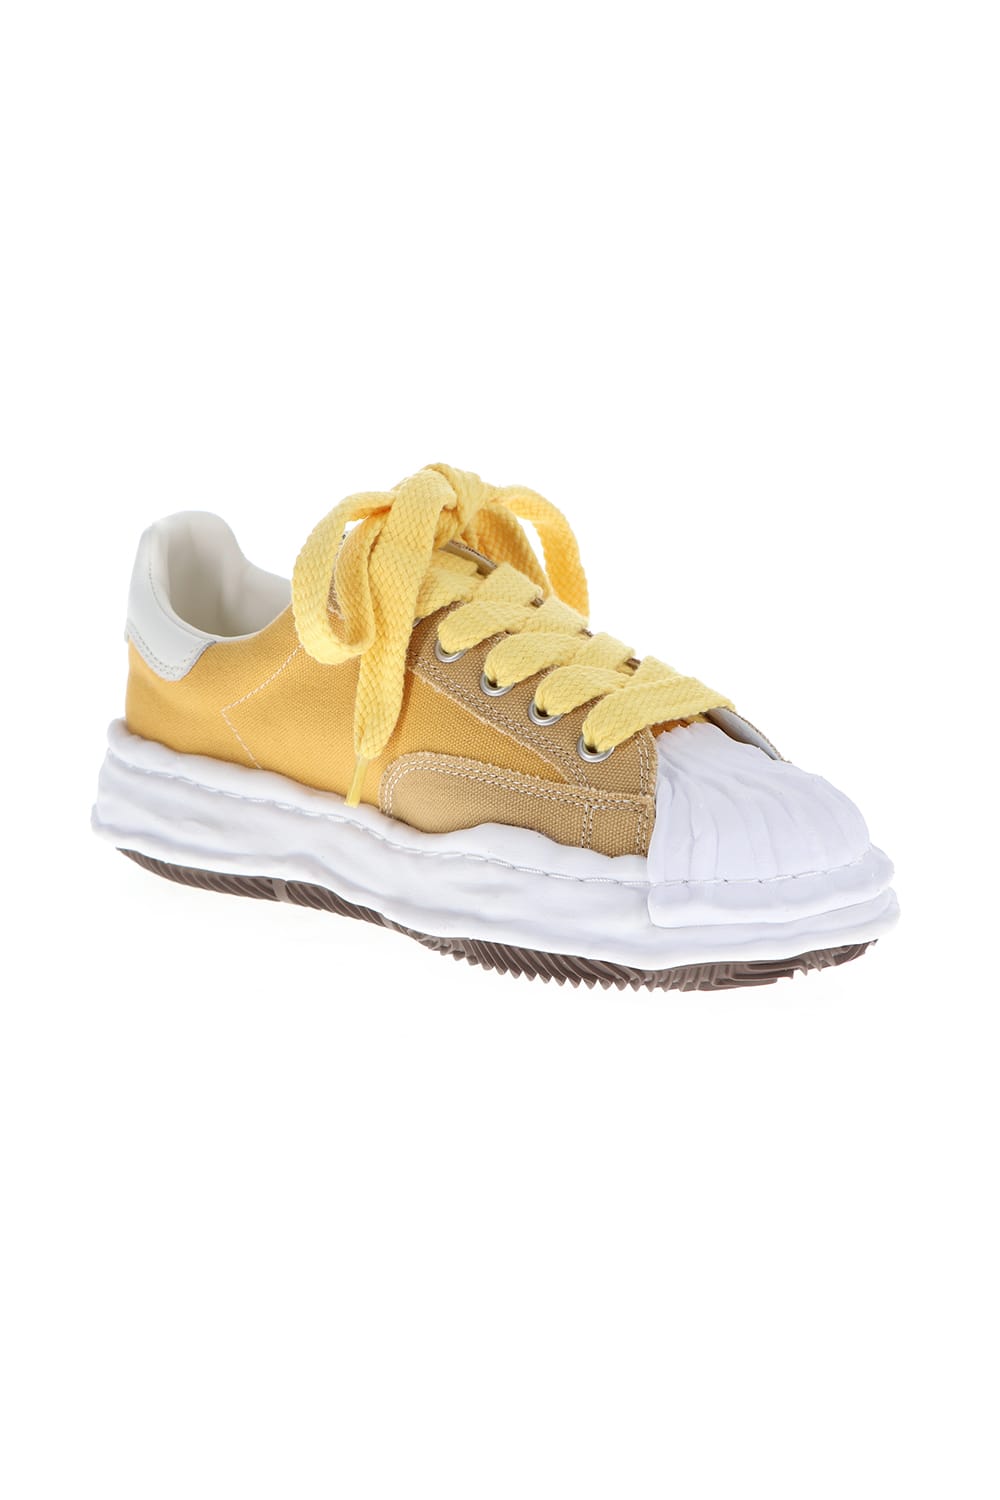 -BLAKEY Low- Original sole canvas Low-Top sneakers Yellow